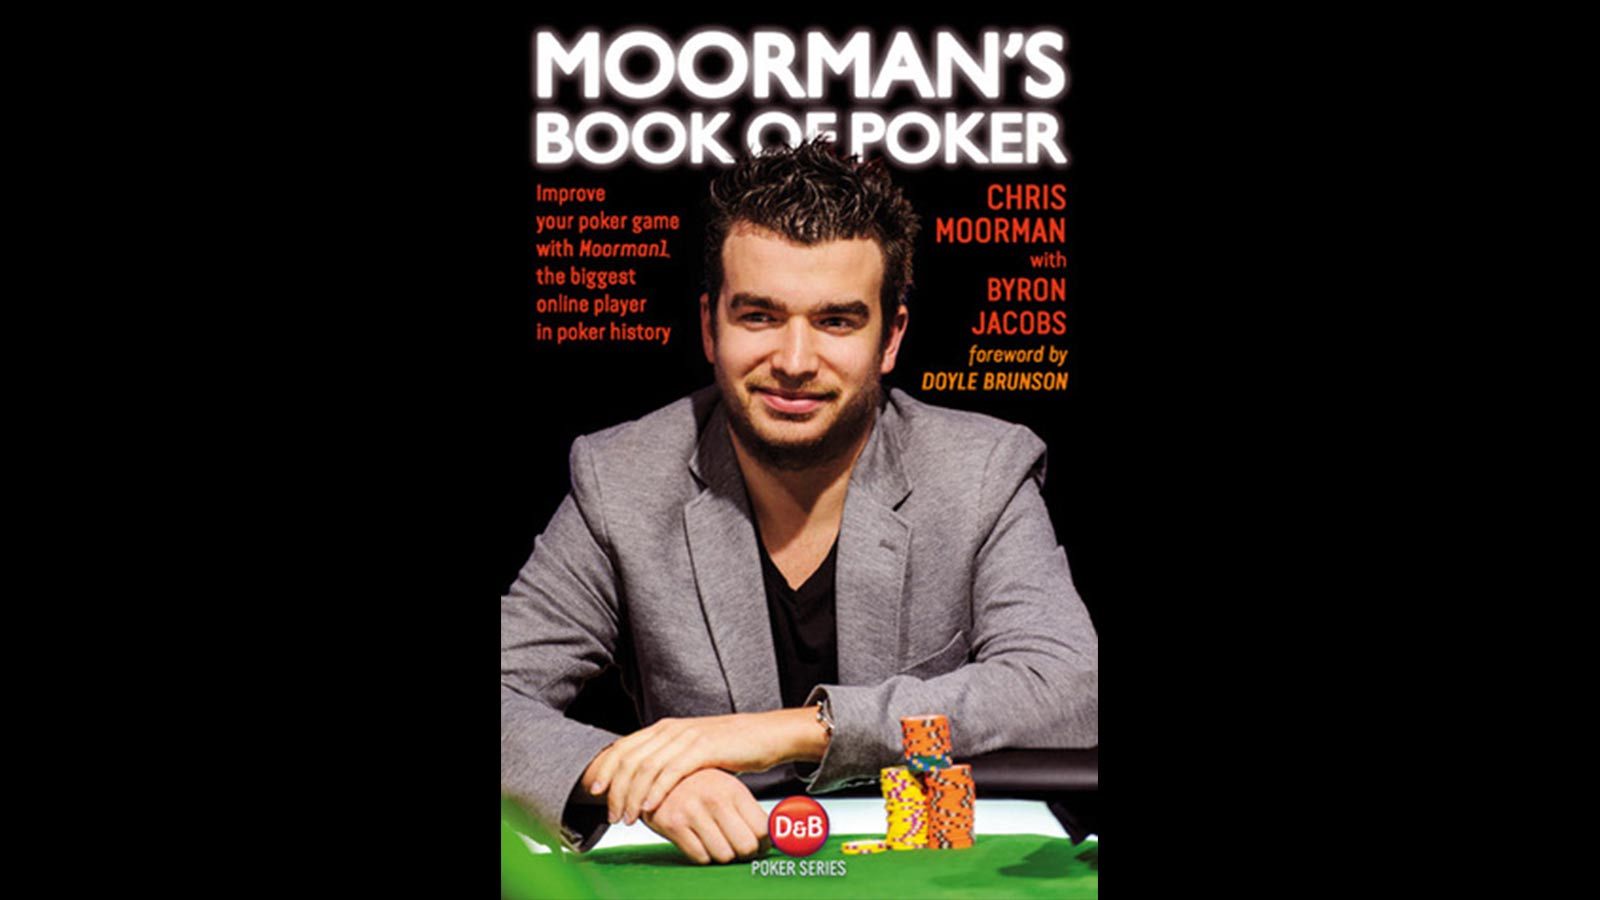 Moorman's Book of Poker Improve Your Poker Game with Moorman1, the Biggest Online Player in Poker History Chris Moorman